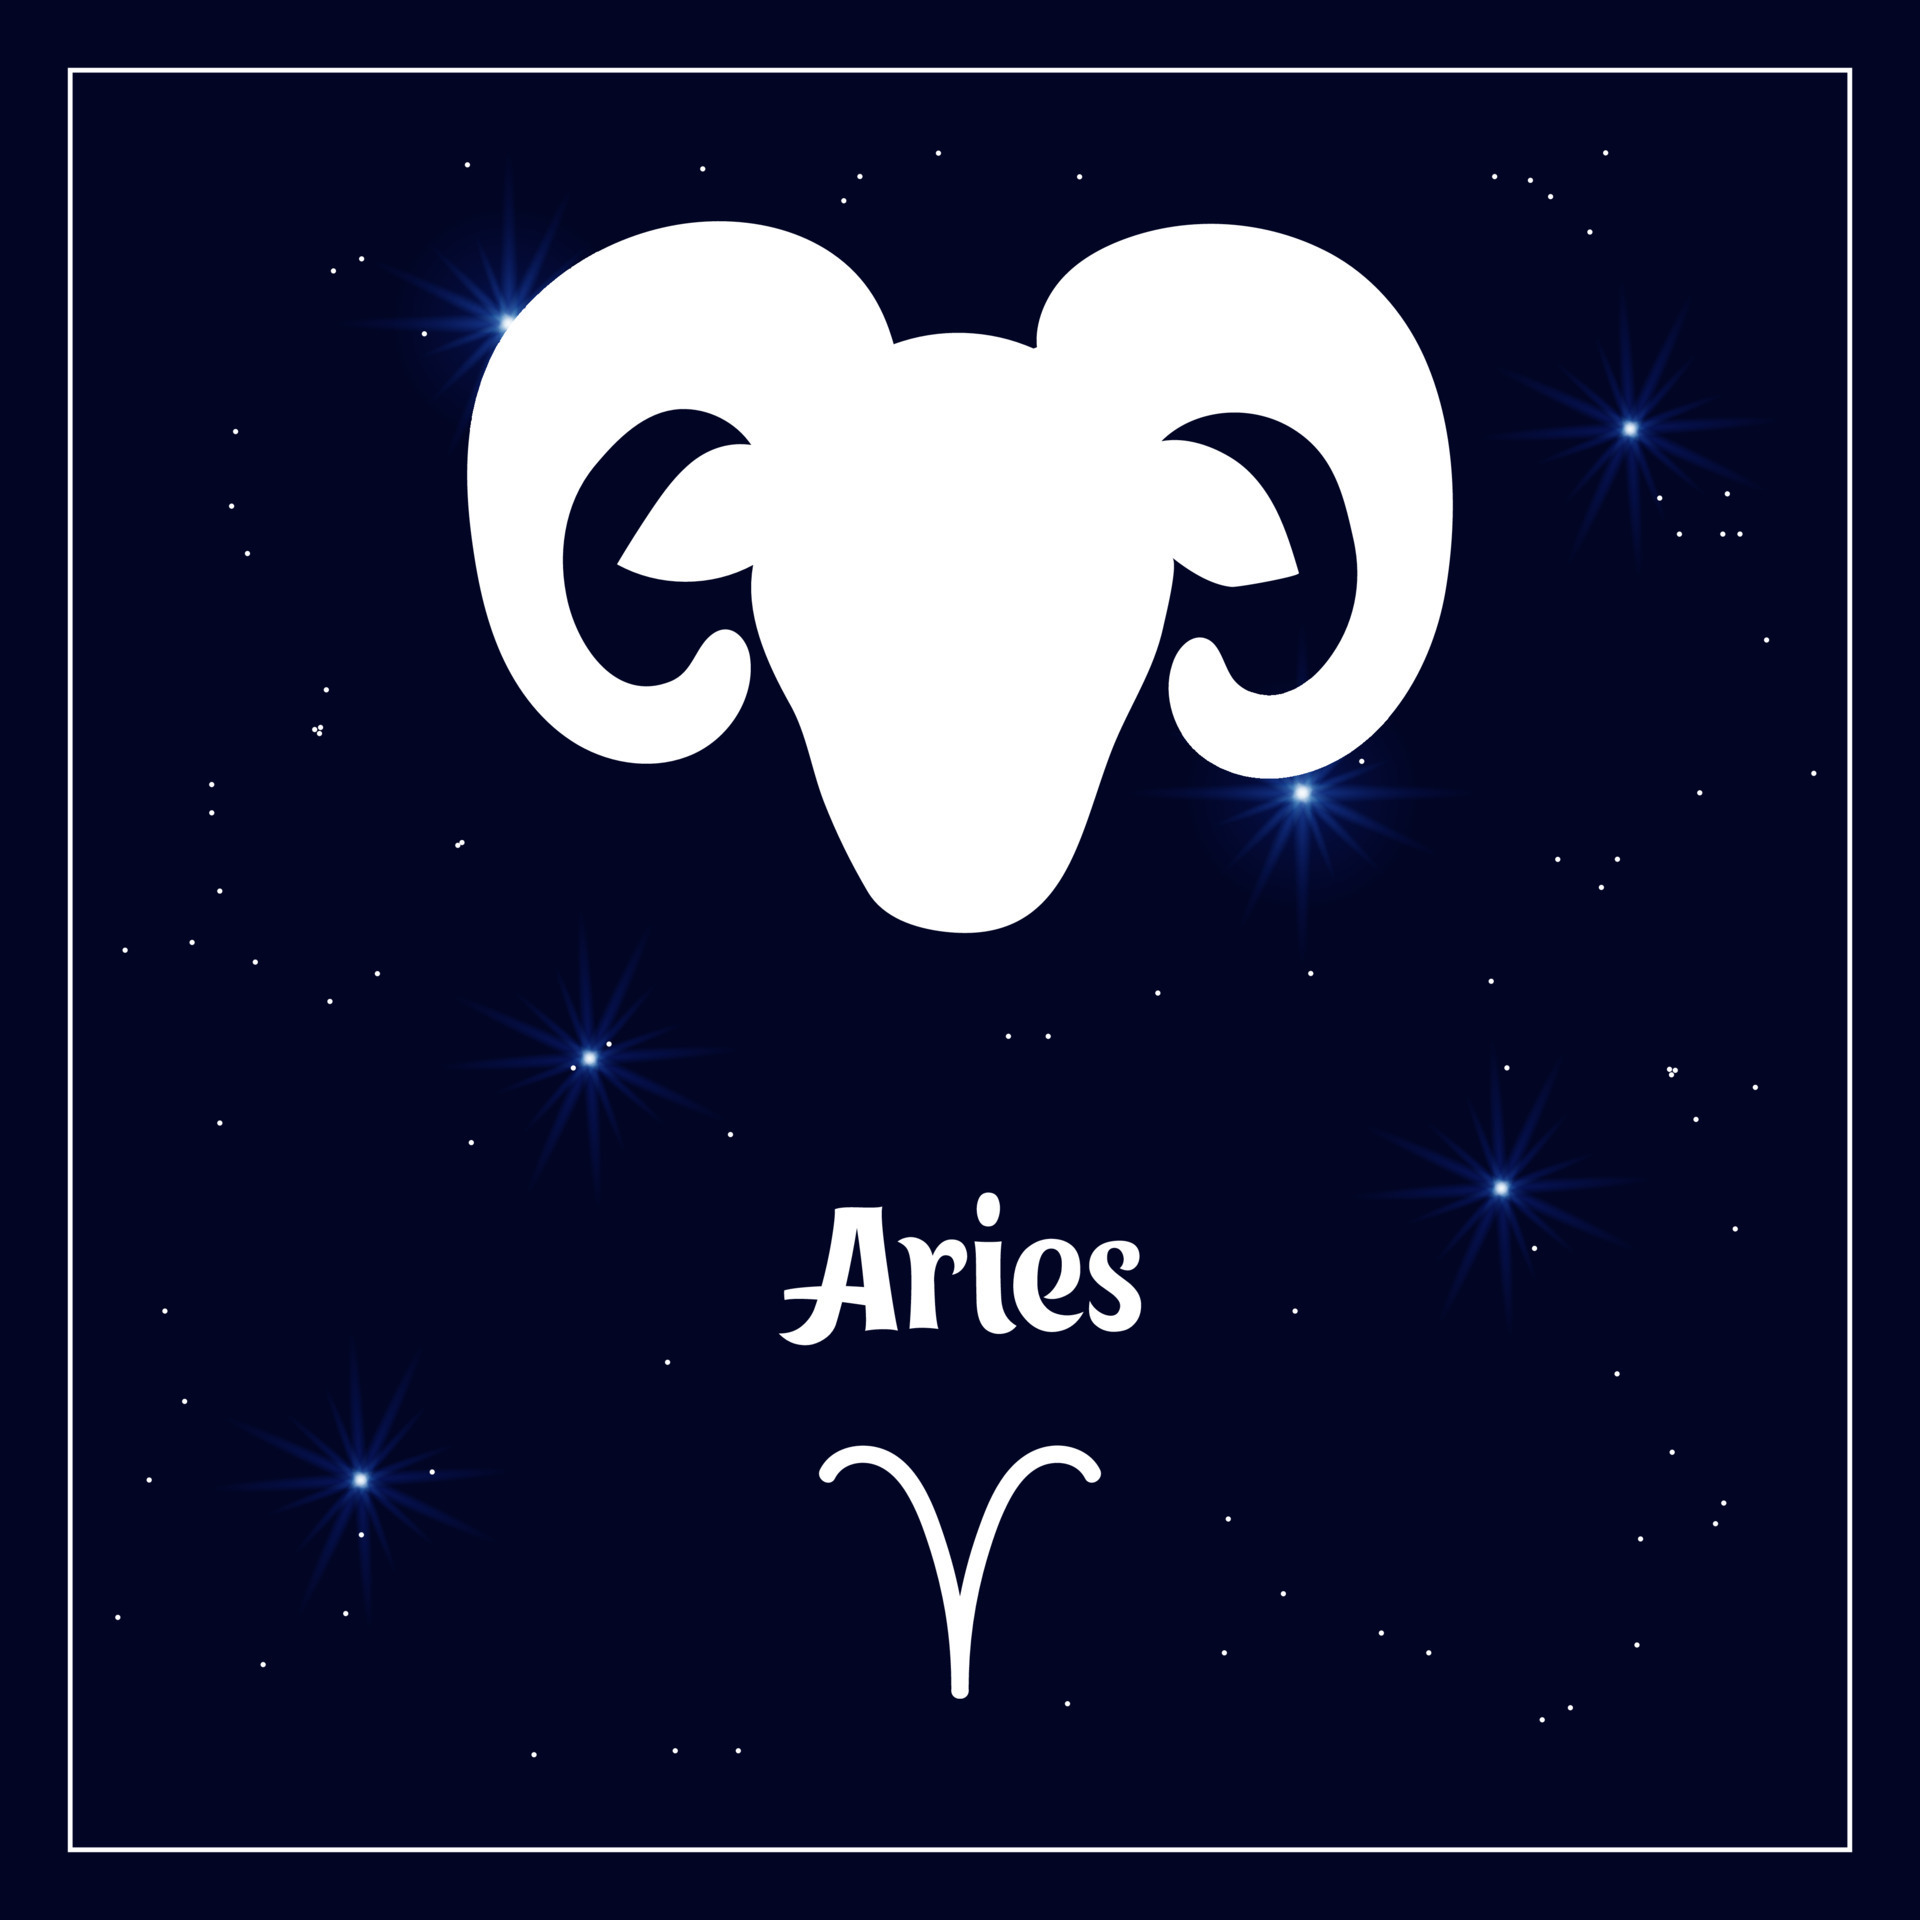 Aries astrological sign of the zodiac horoscope on the night sky with ...